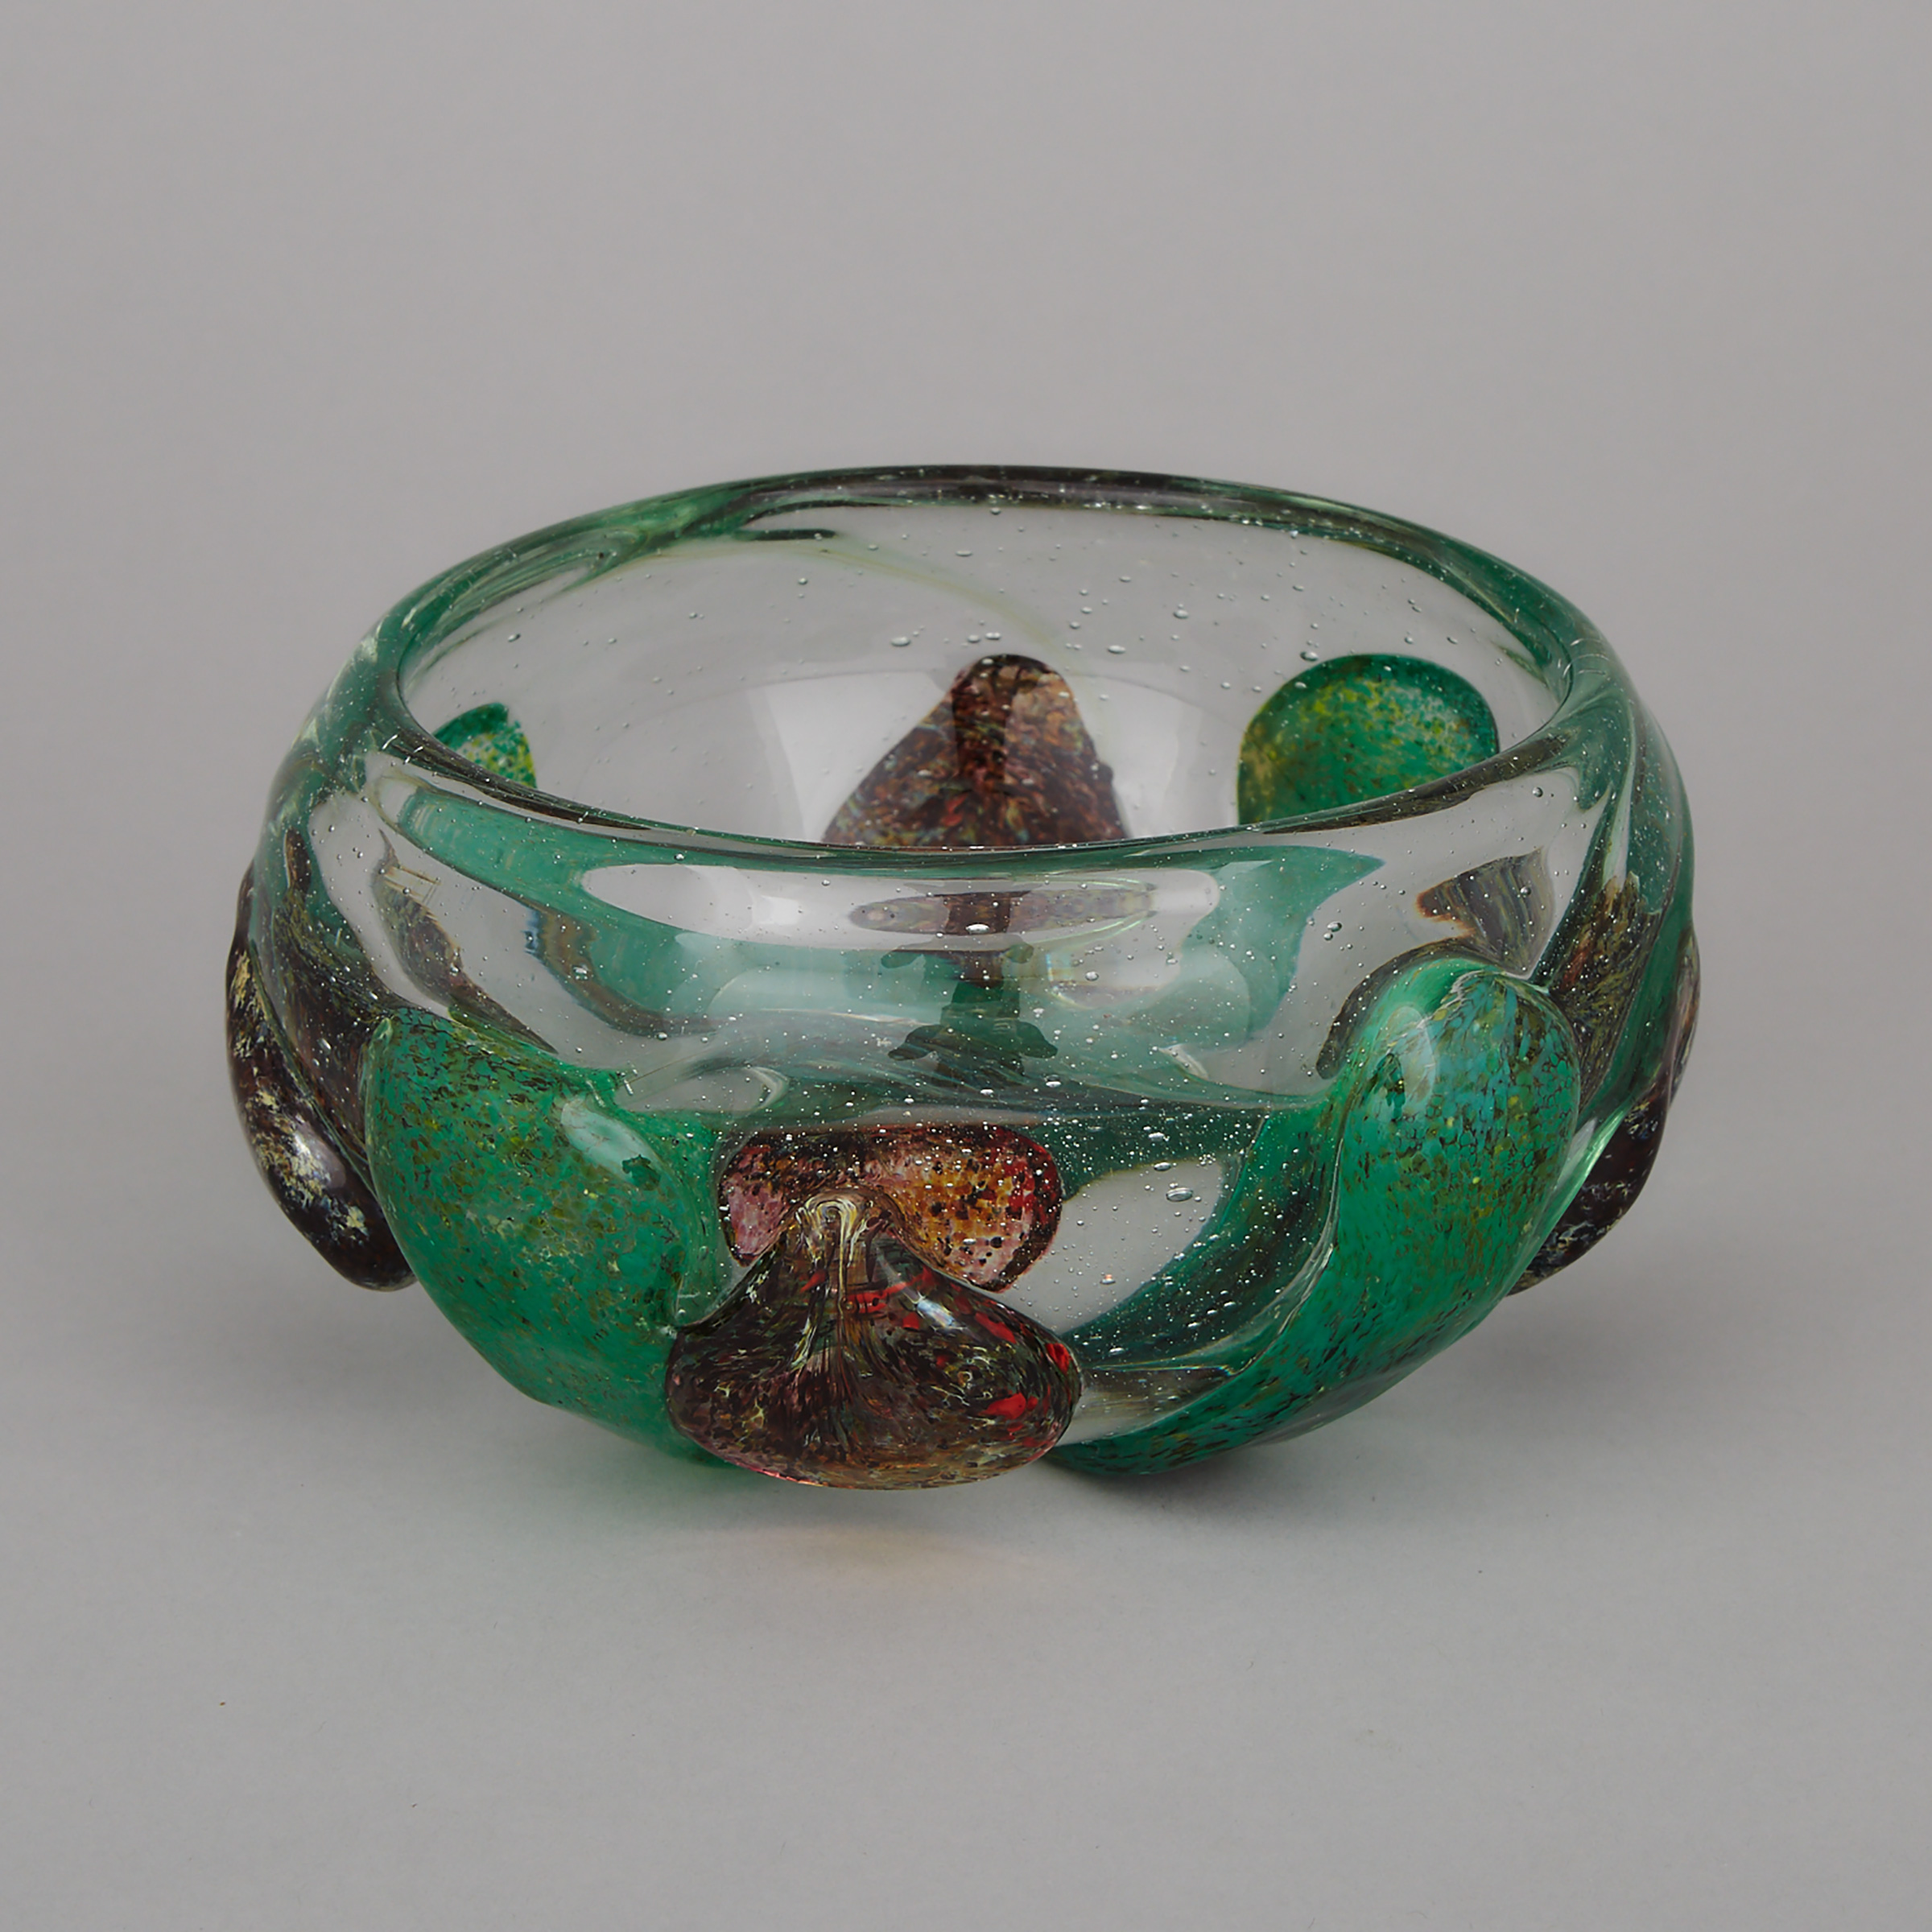 Shirley Cloete (South African, 1921-2020), Glass Bowl, 1979